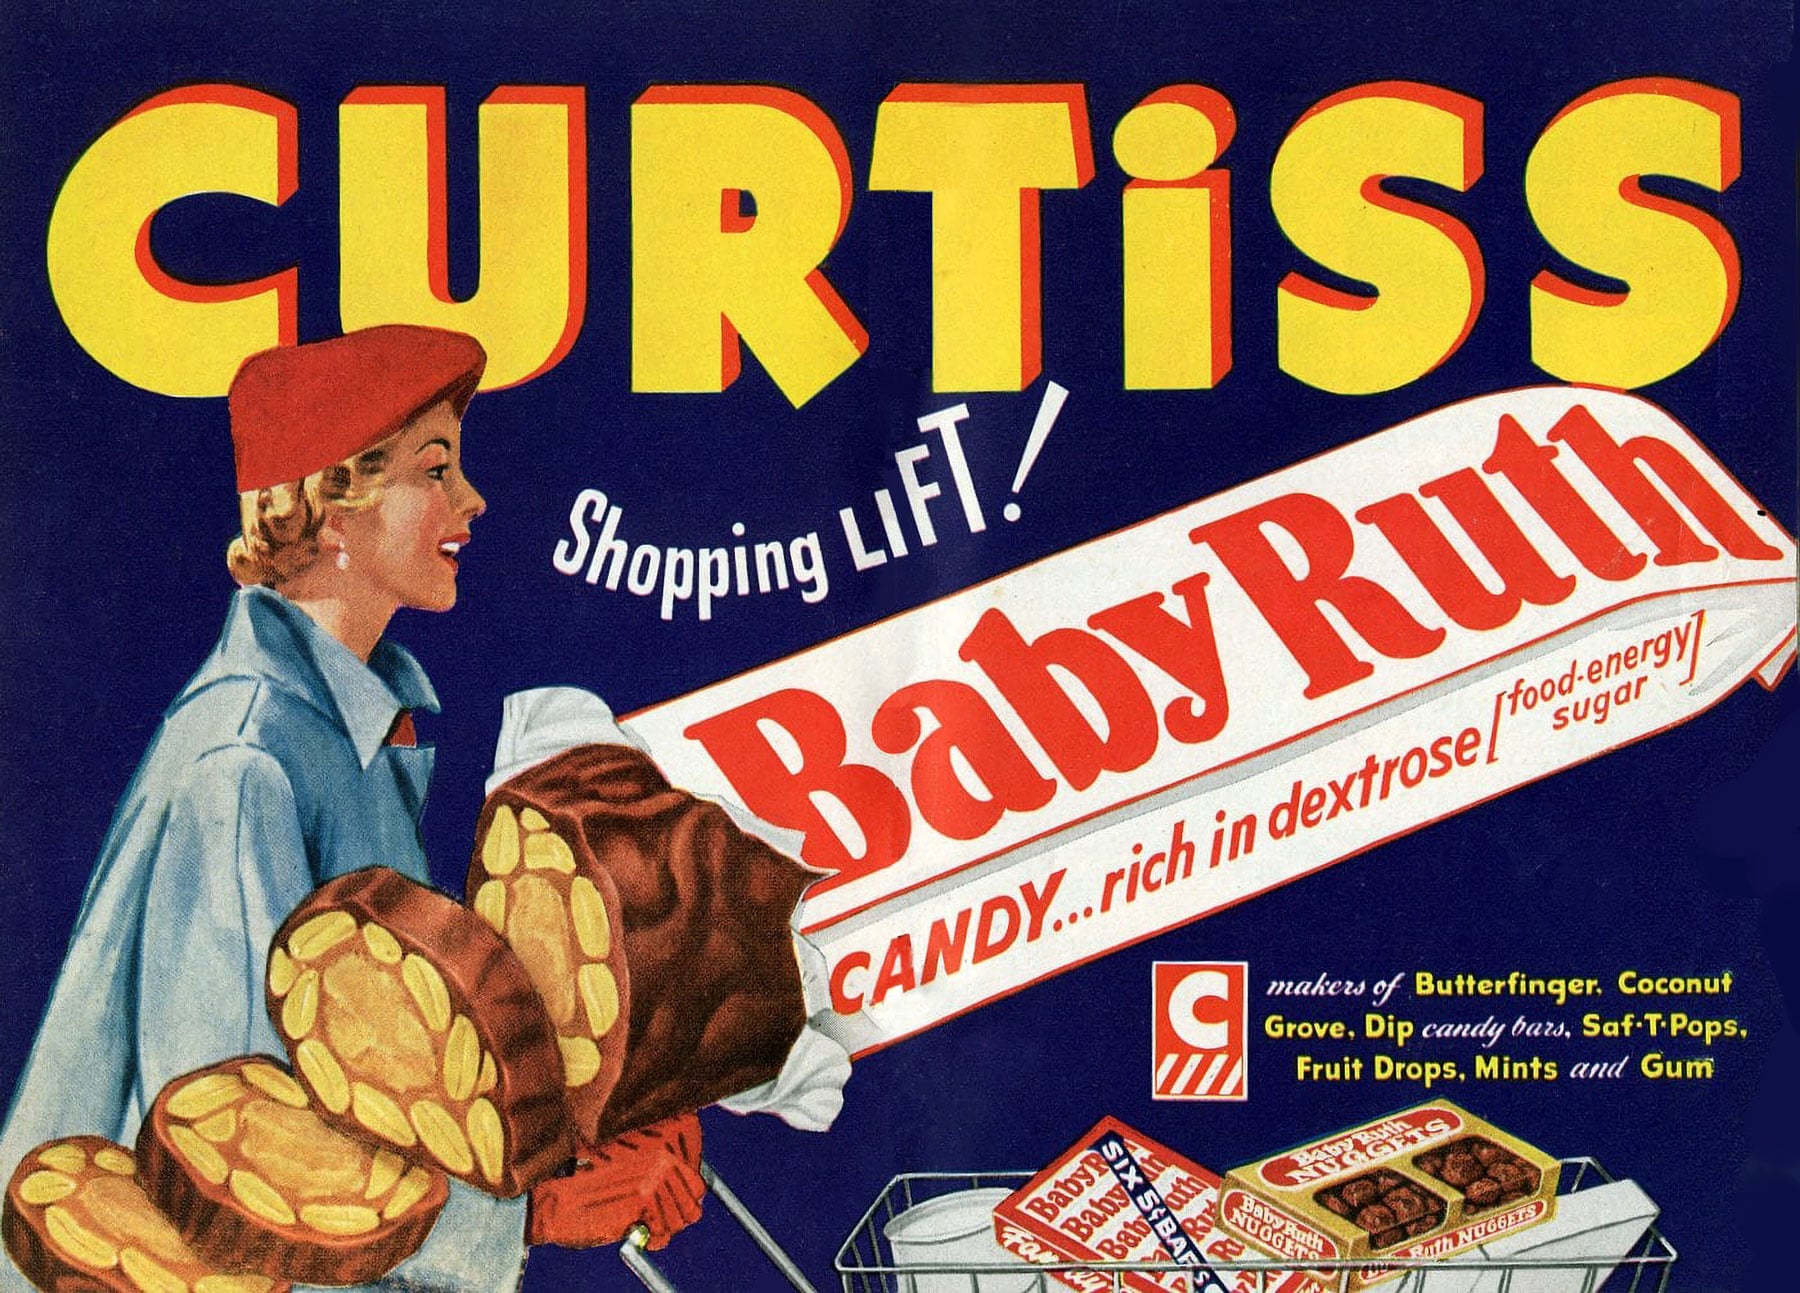 Vintage Baby Ruth ad